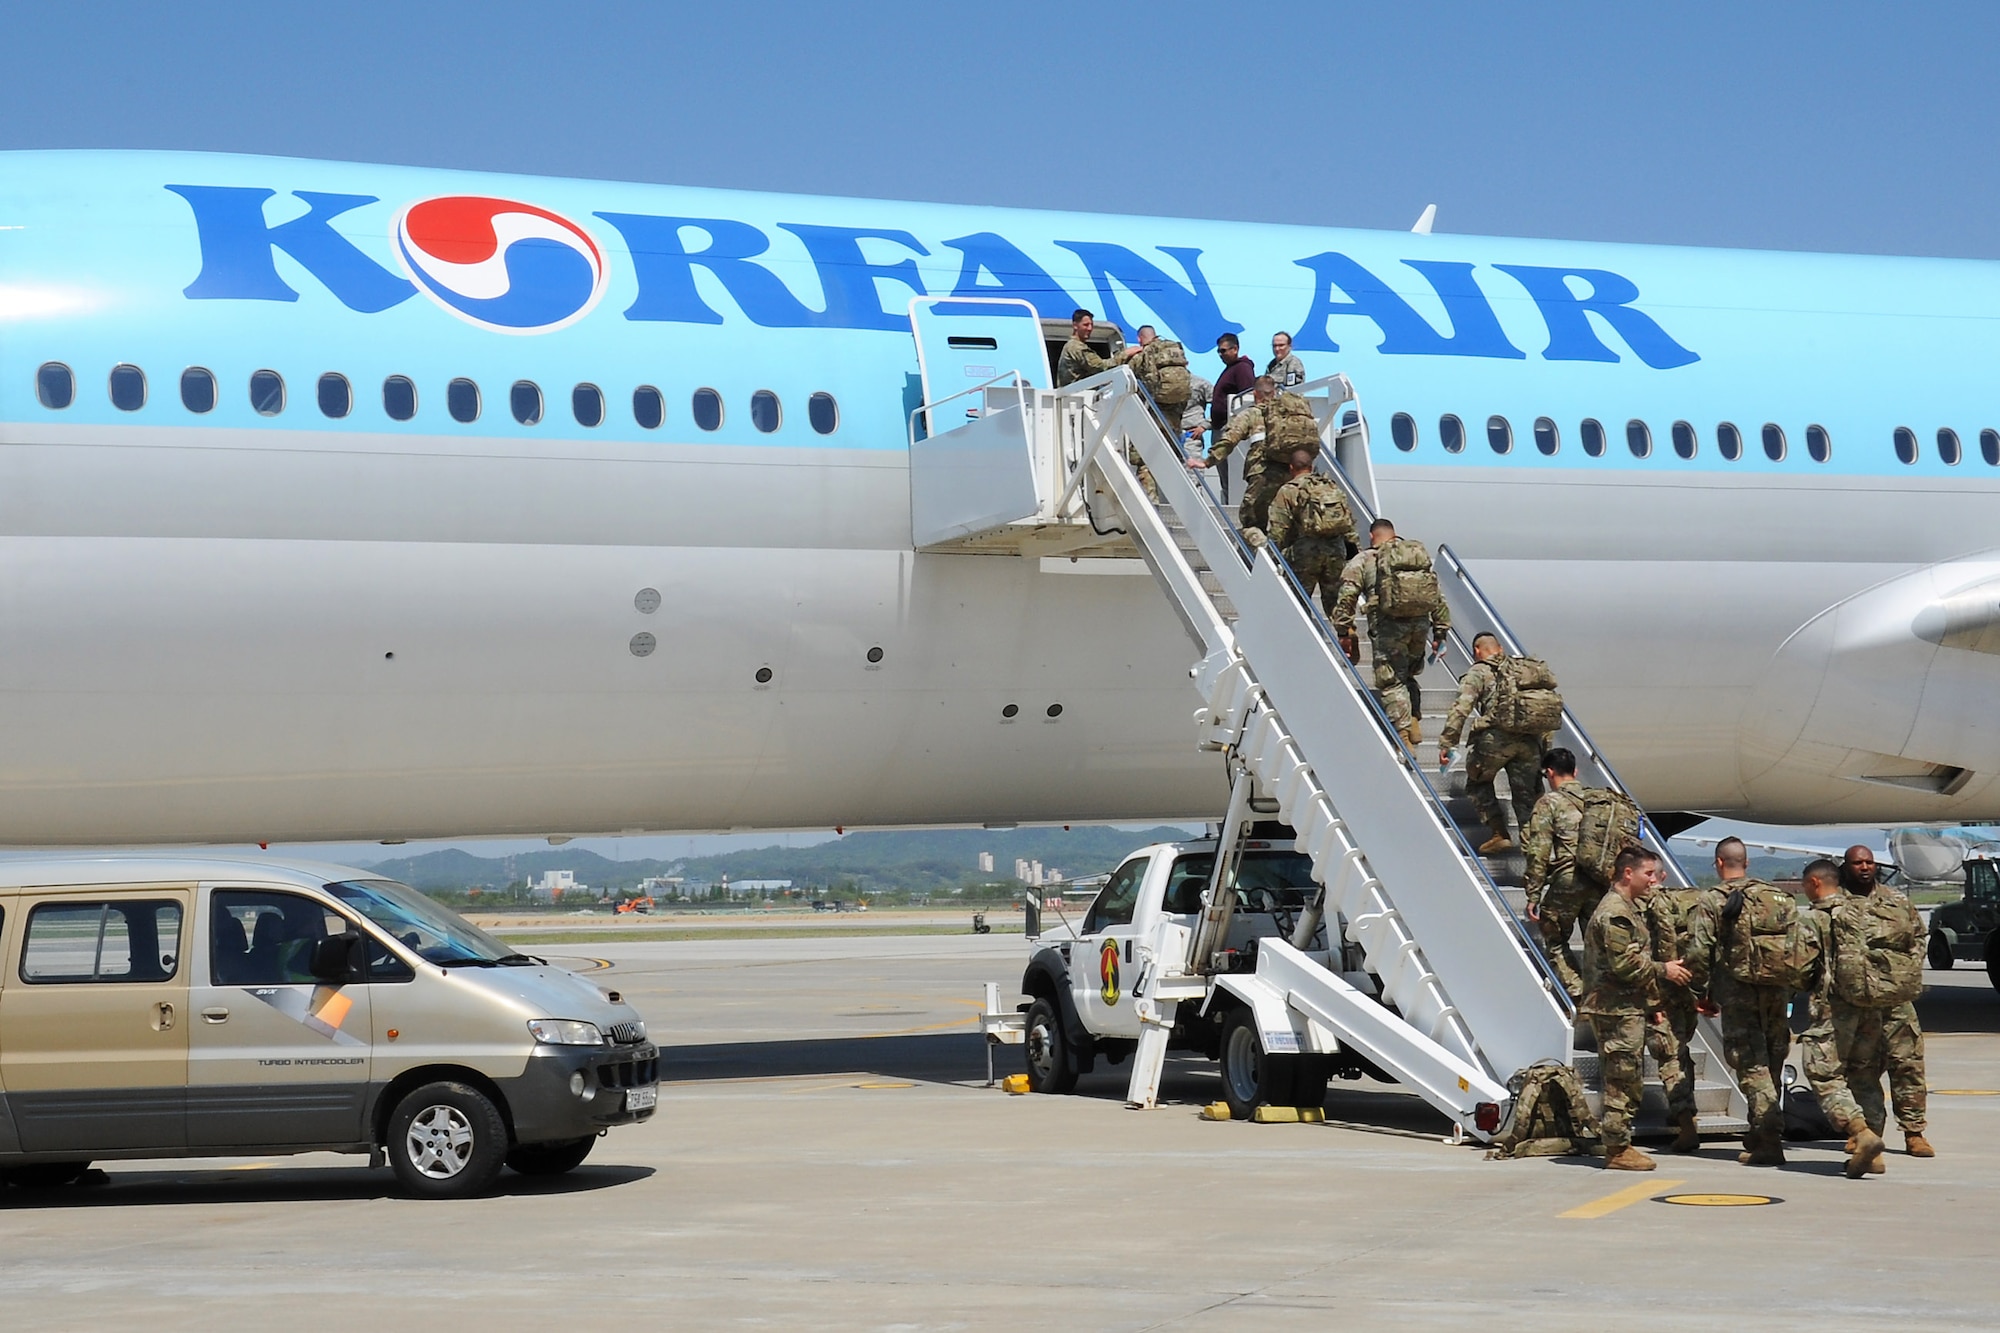 U.S. Army Soldiers board a Korean Air Boeing 777 aircraft during the Mutual Airlift Support Agreement (MASA) exercise at Osan Air Base, Republic of Korea May 4, 2018. More than 500 Soldiers boarded the plane as part of the MASA to test interoperability and procedures between the United States military, ROK Air Force and Korean Air Lines. (U.S. Air Force photo by Tech. Sgt. Ashley Tyler)